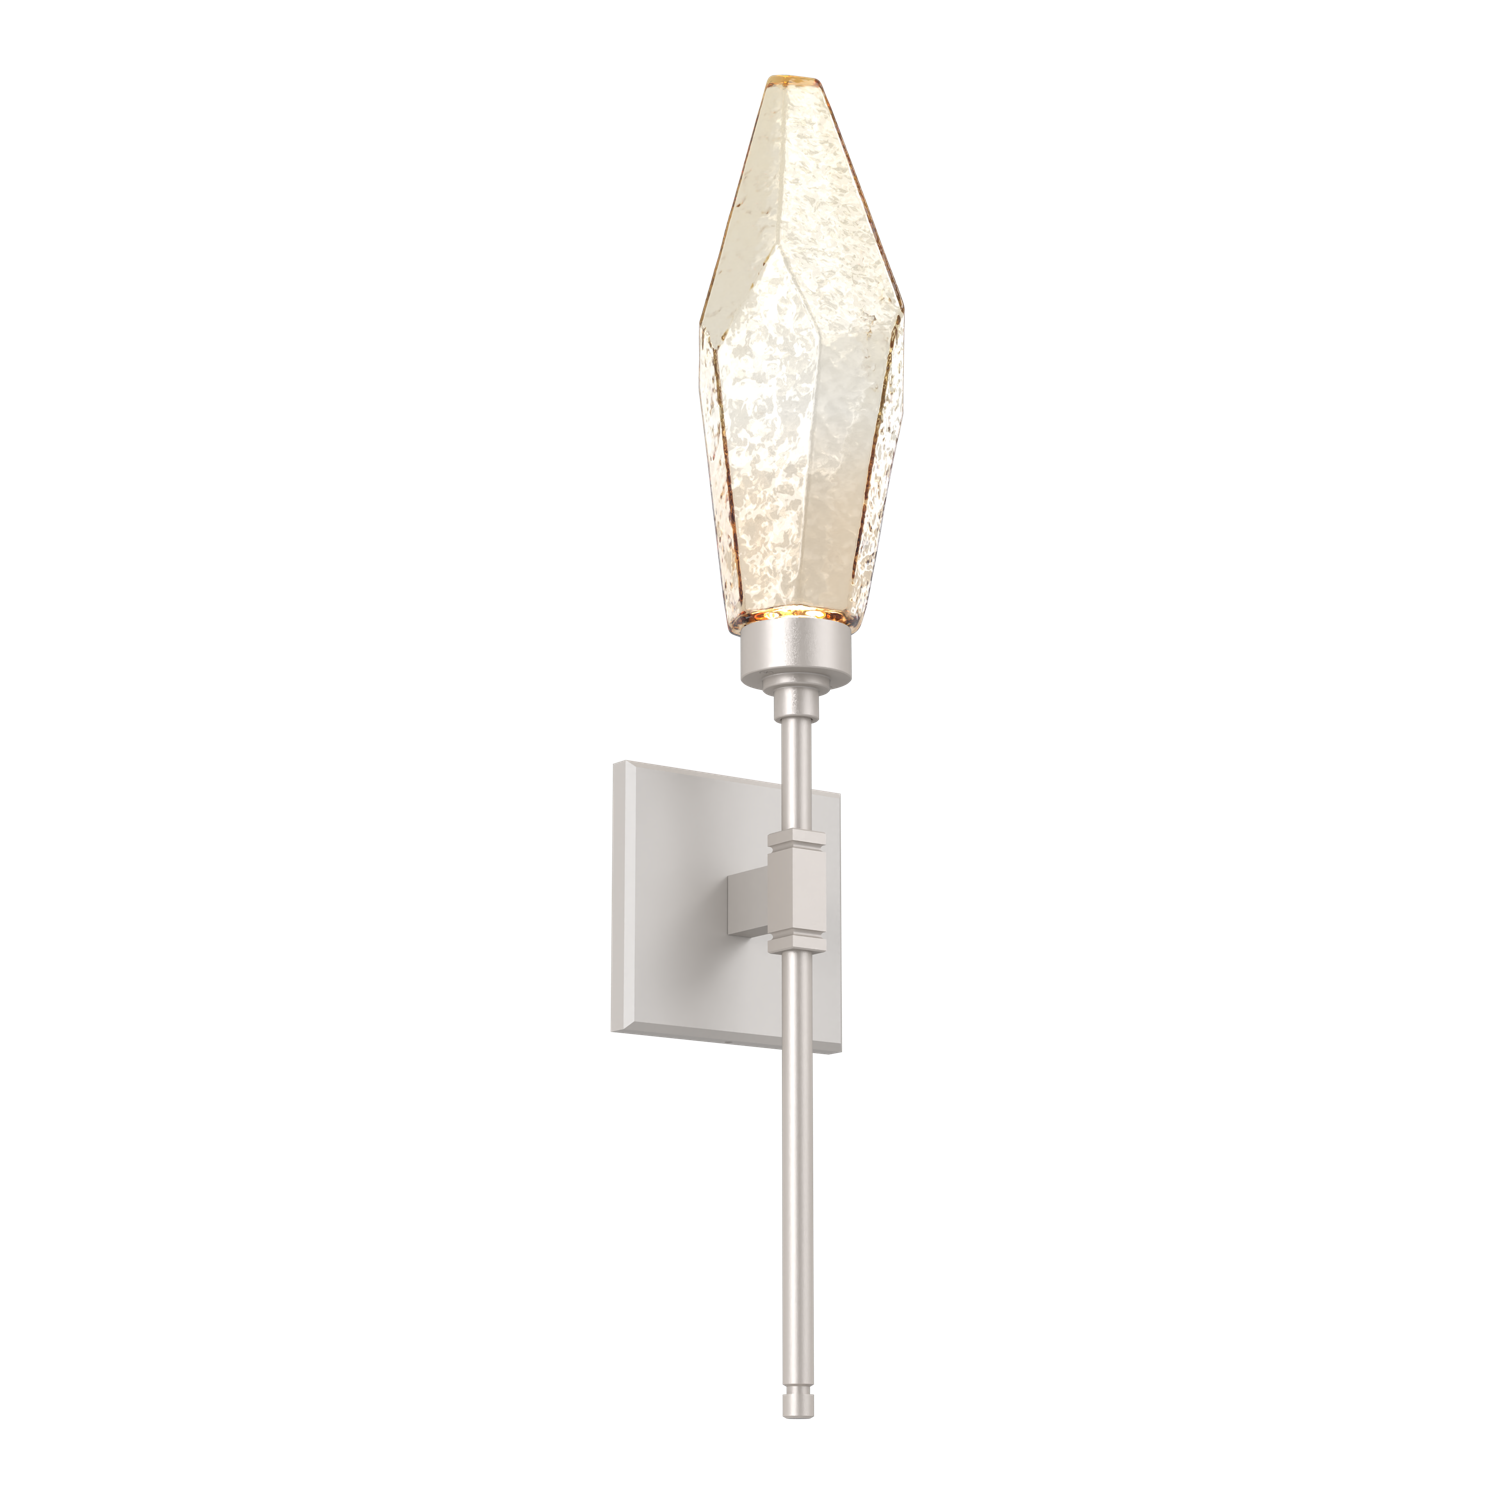 IDB0050-04-BS-CA-Hammerton-Studio-Rock-Crystal-ada-certified-belvedere-wall-sconce-with-beige-silver-finish-and-chilled-amber-blown-glass-shades-and-LED-lamping